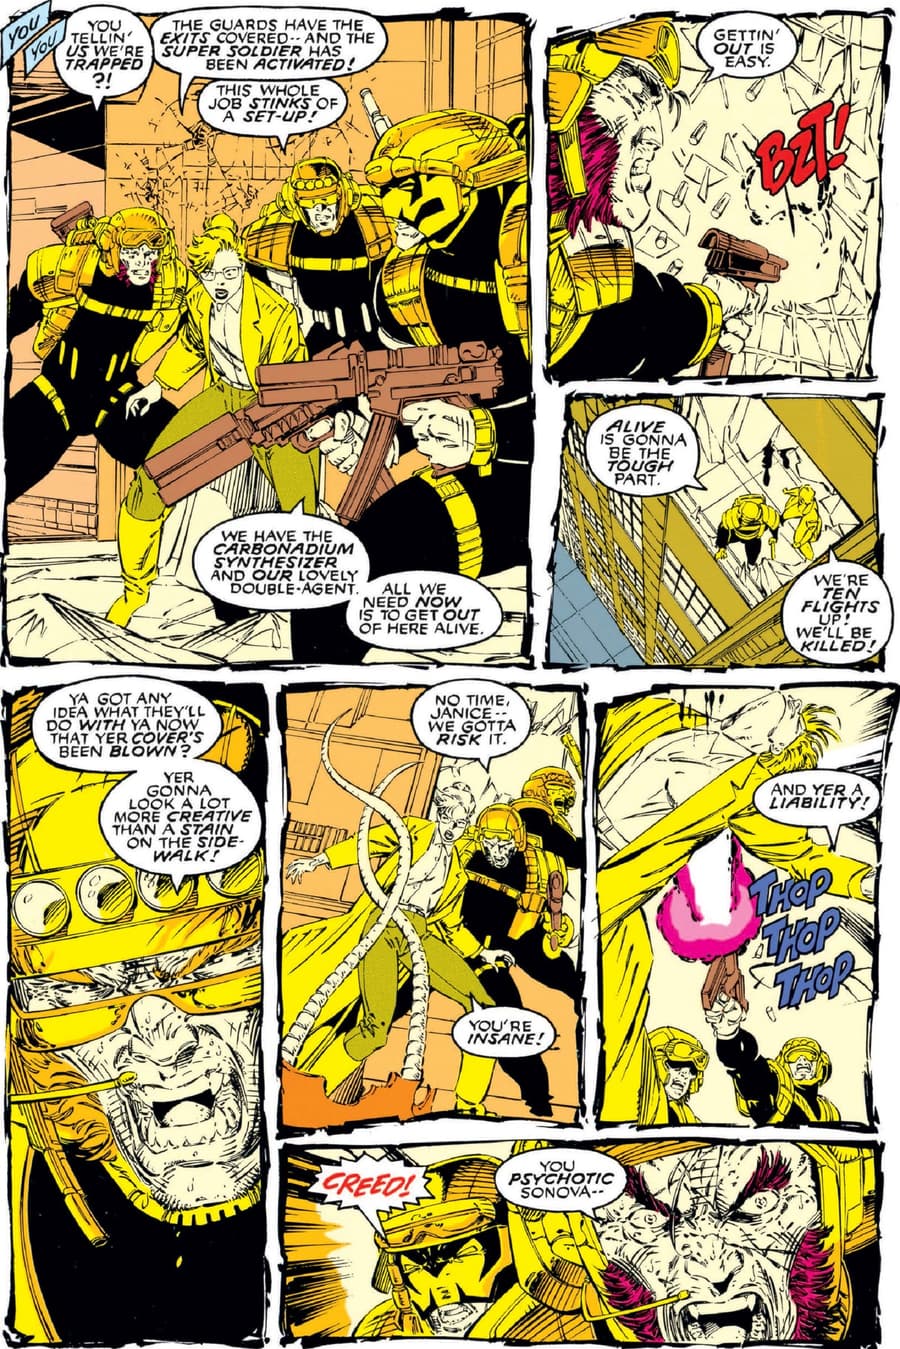 Team X’s mission gone awry in X-MEN (1991) #6.